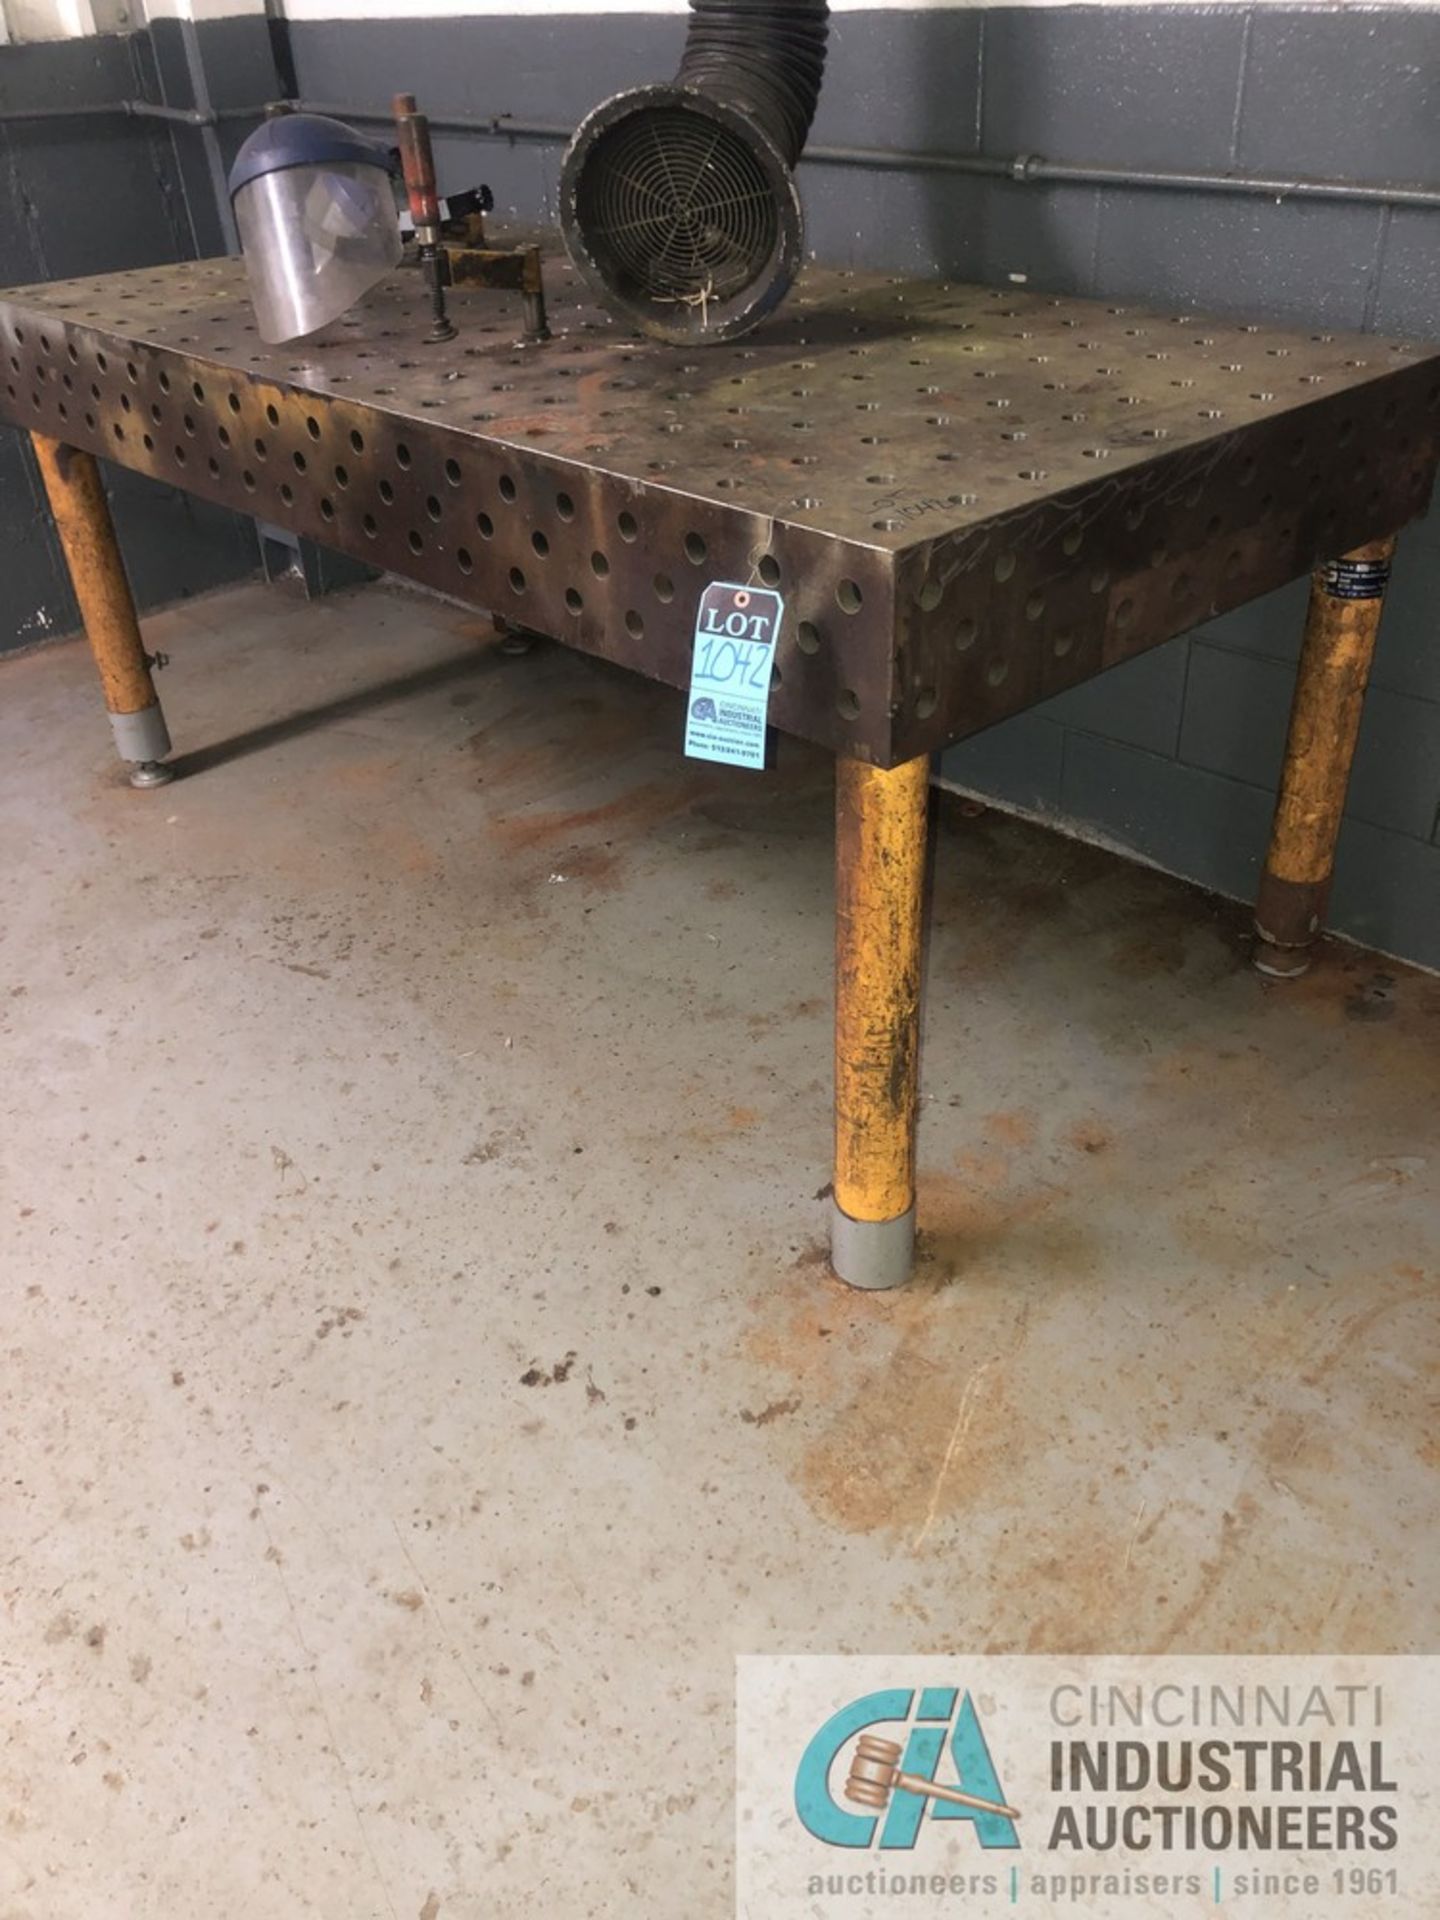 38 1/4” x 78 3/4” x 34 1/2" H DEMMELER WELD TABLE WITH (2) WELD SHIELD HELMETS; 8” THICK TABLE